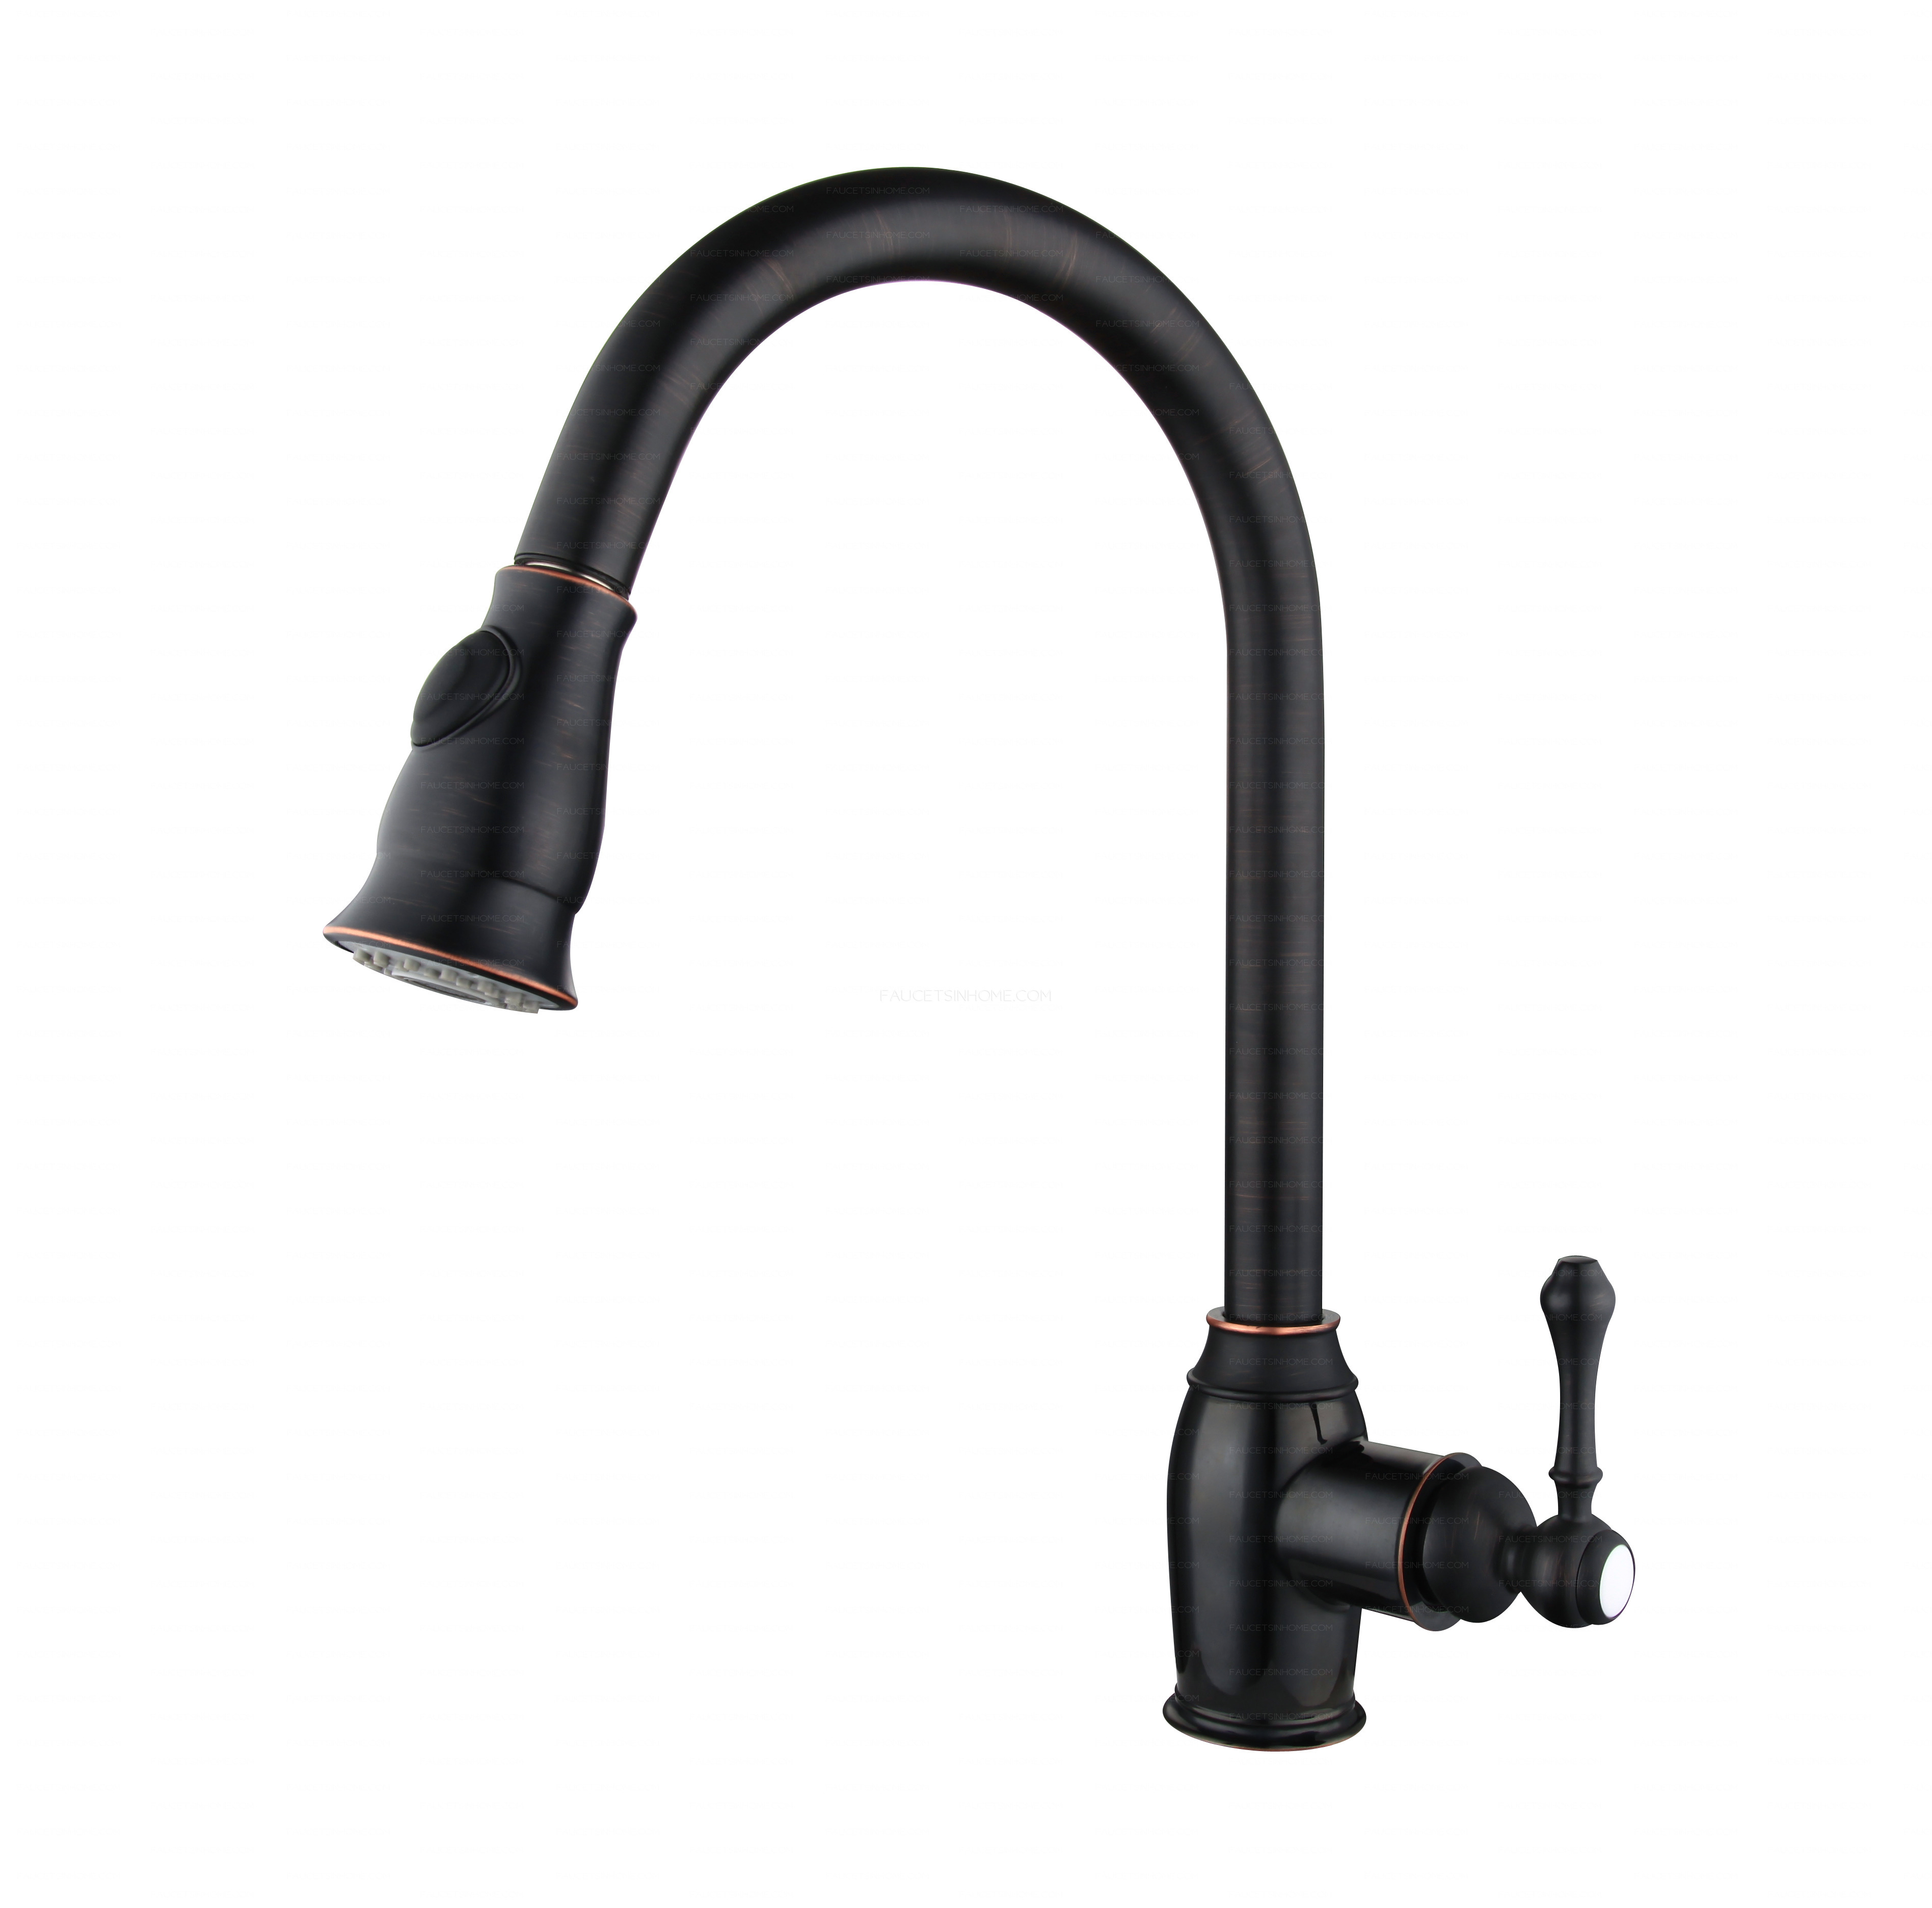 Oil Rubbed Bronze Kitchen Sink Faucet Pull Out Sprayer Mixer Tap 360 Degree Rotating Single Handle Pull Down Kitchen Faucet 